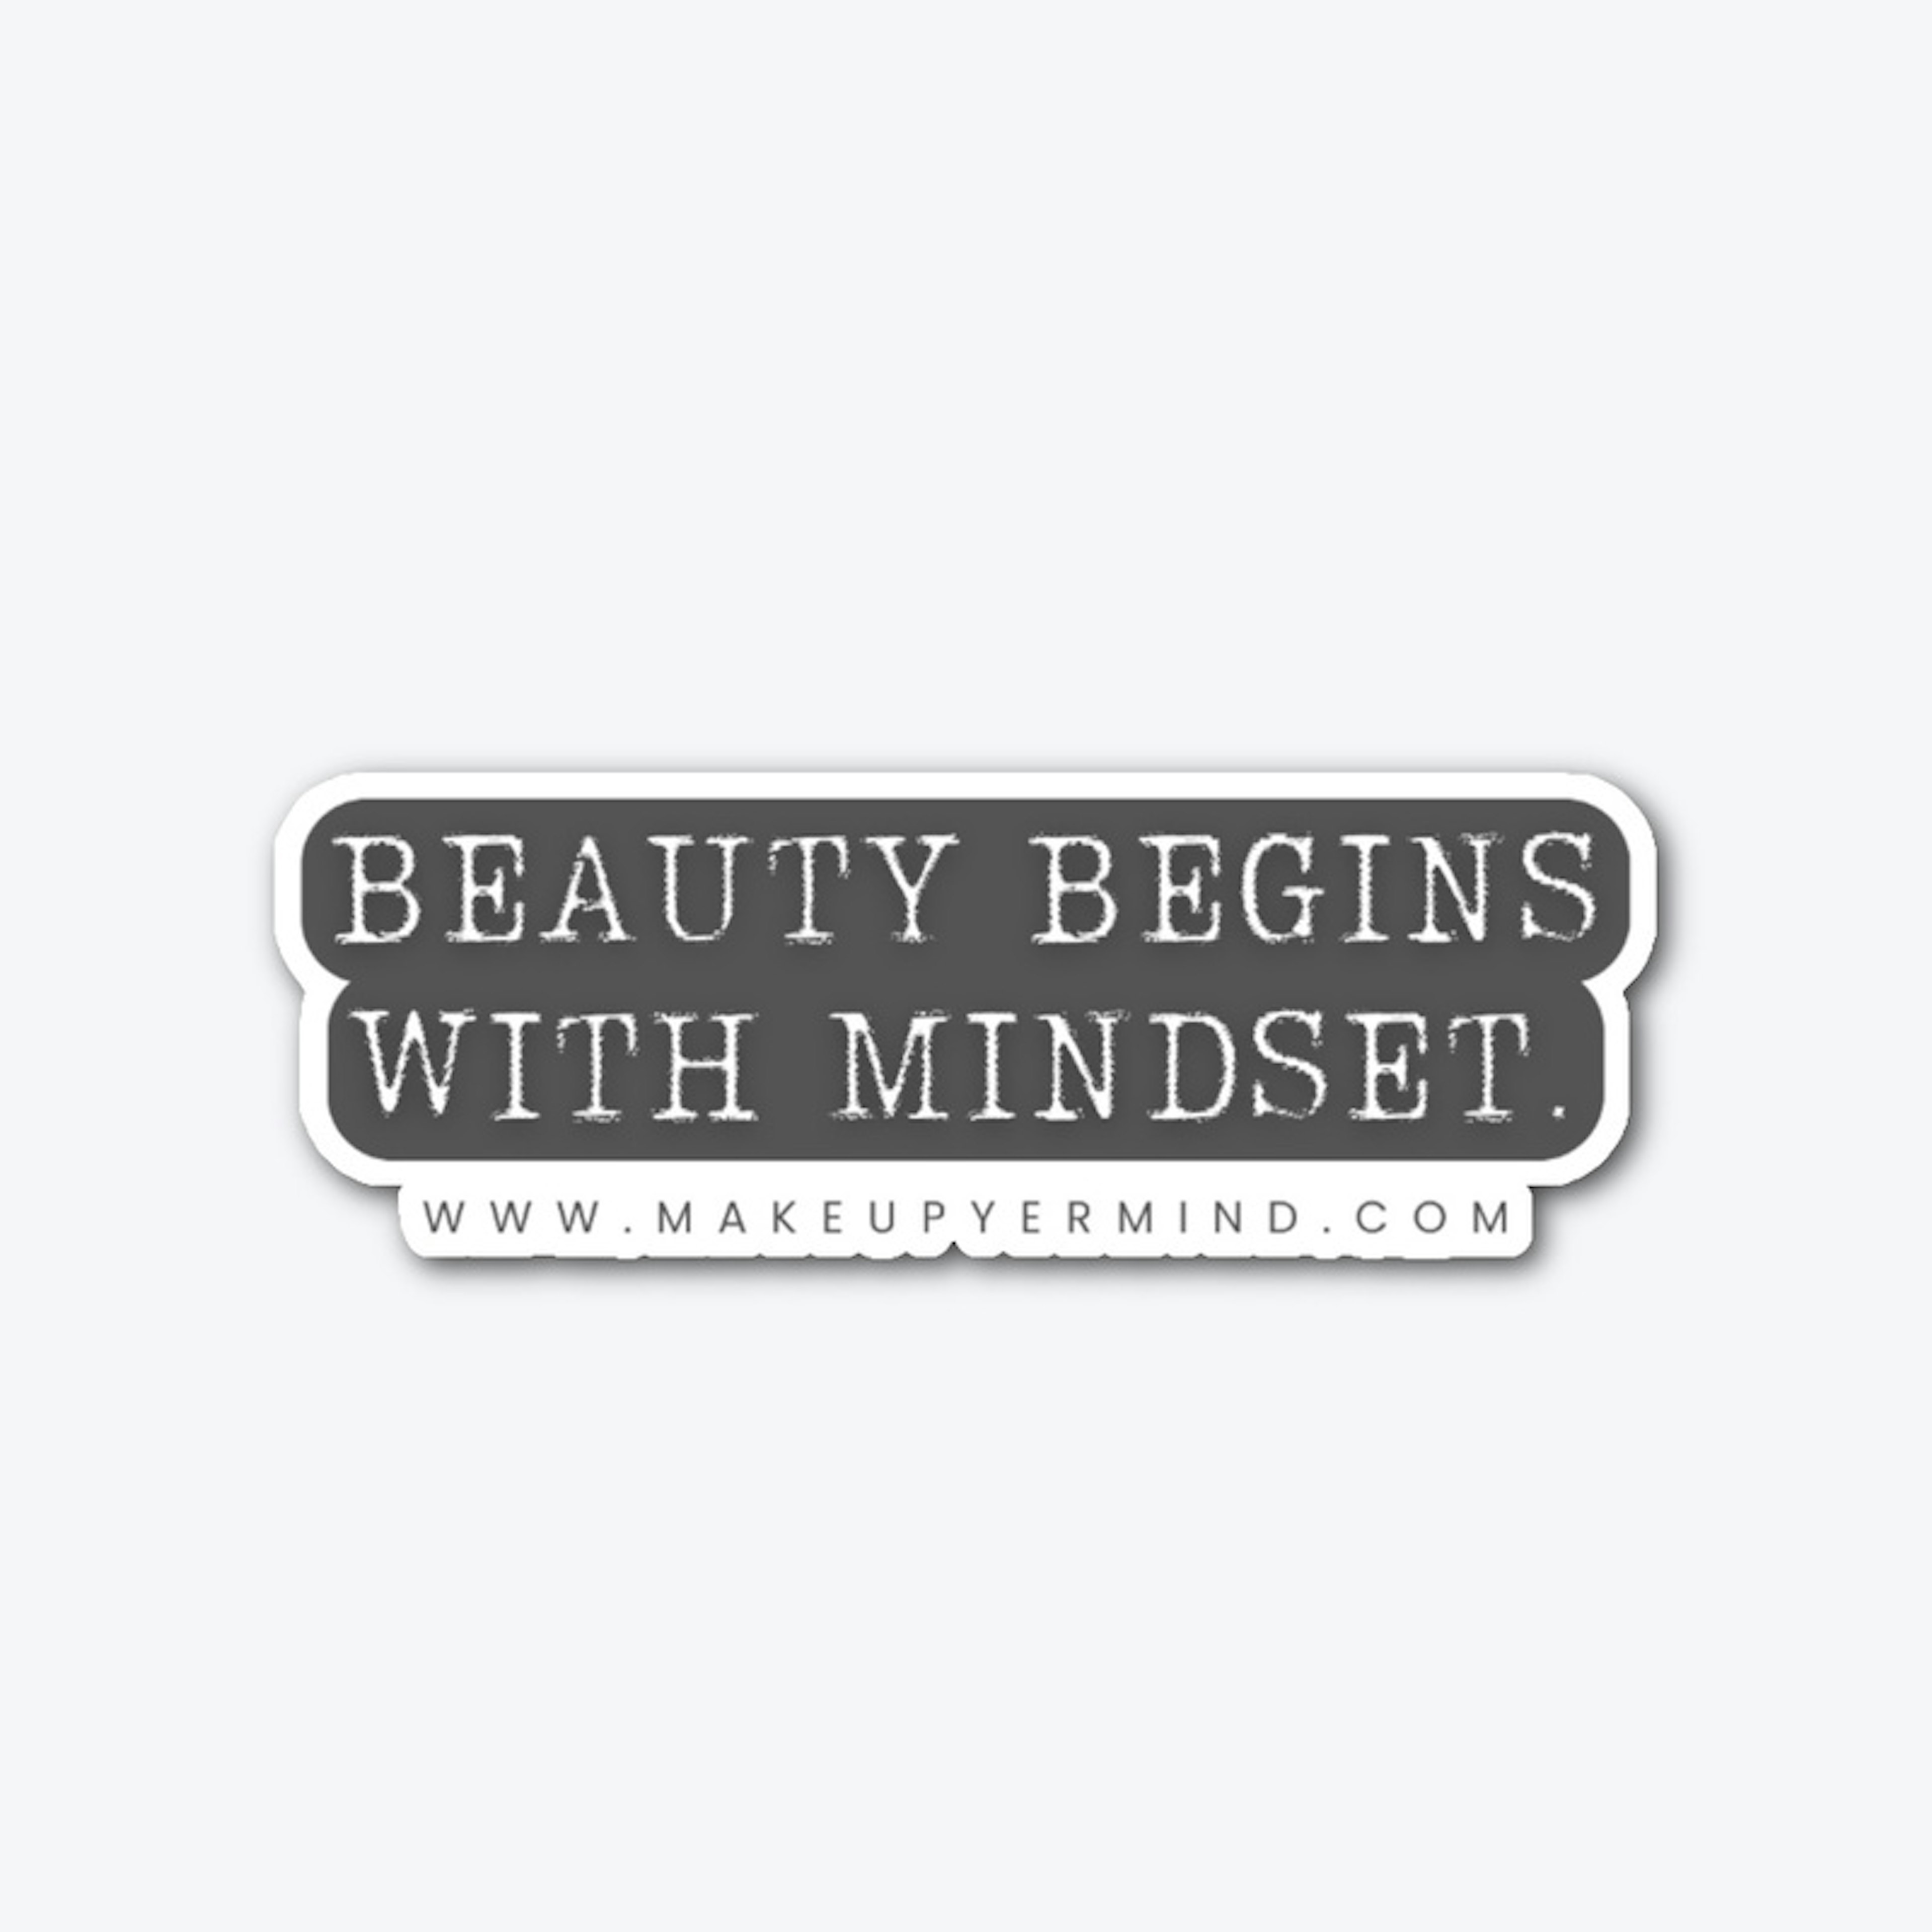 Beauty Begins with Mindset